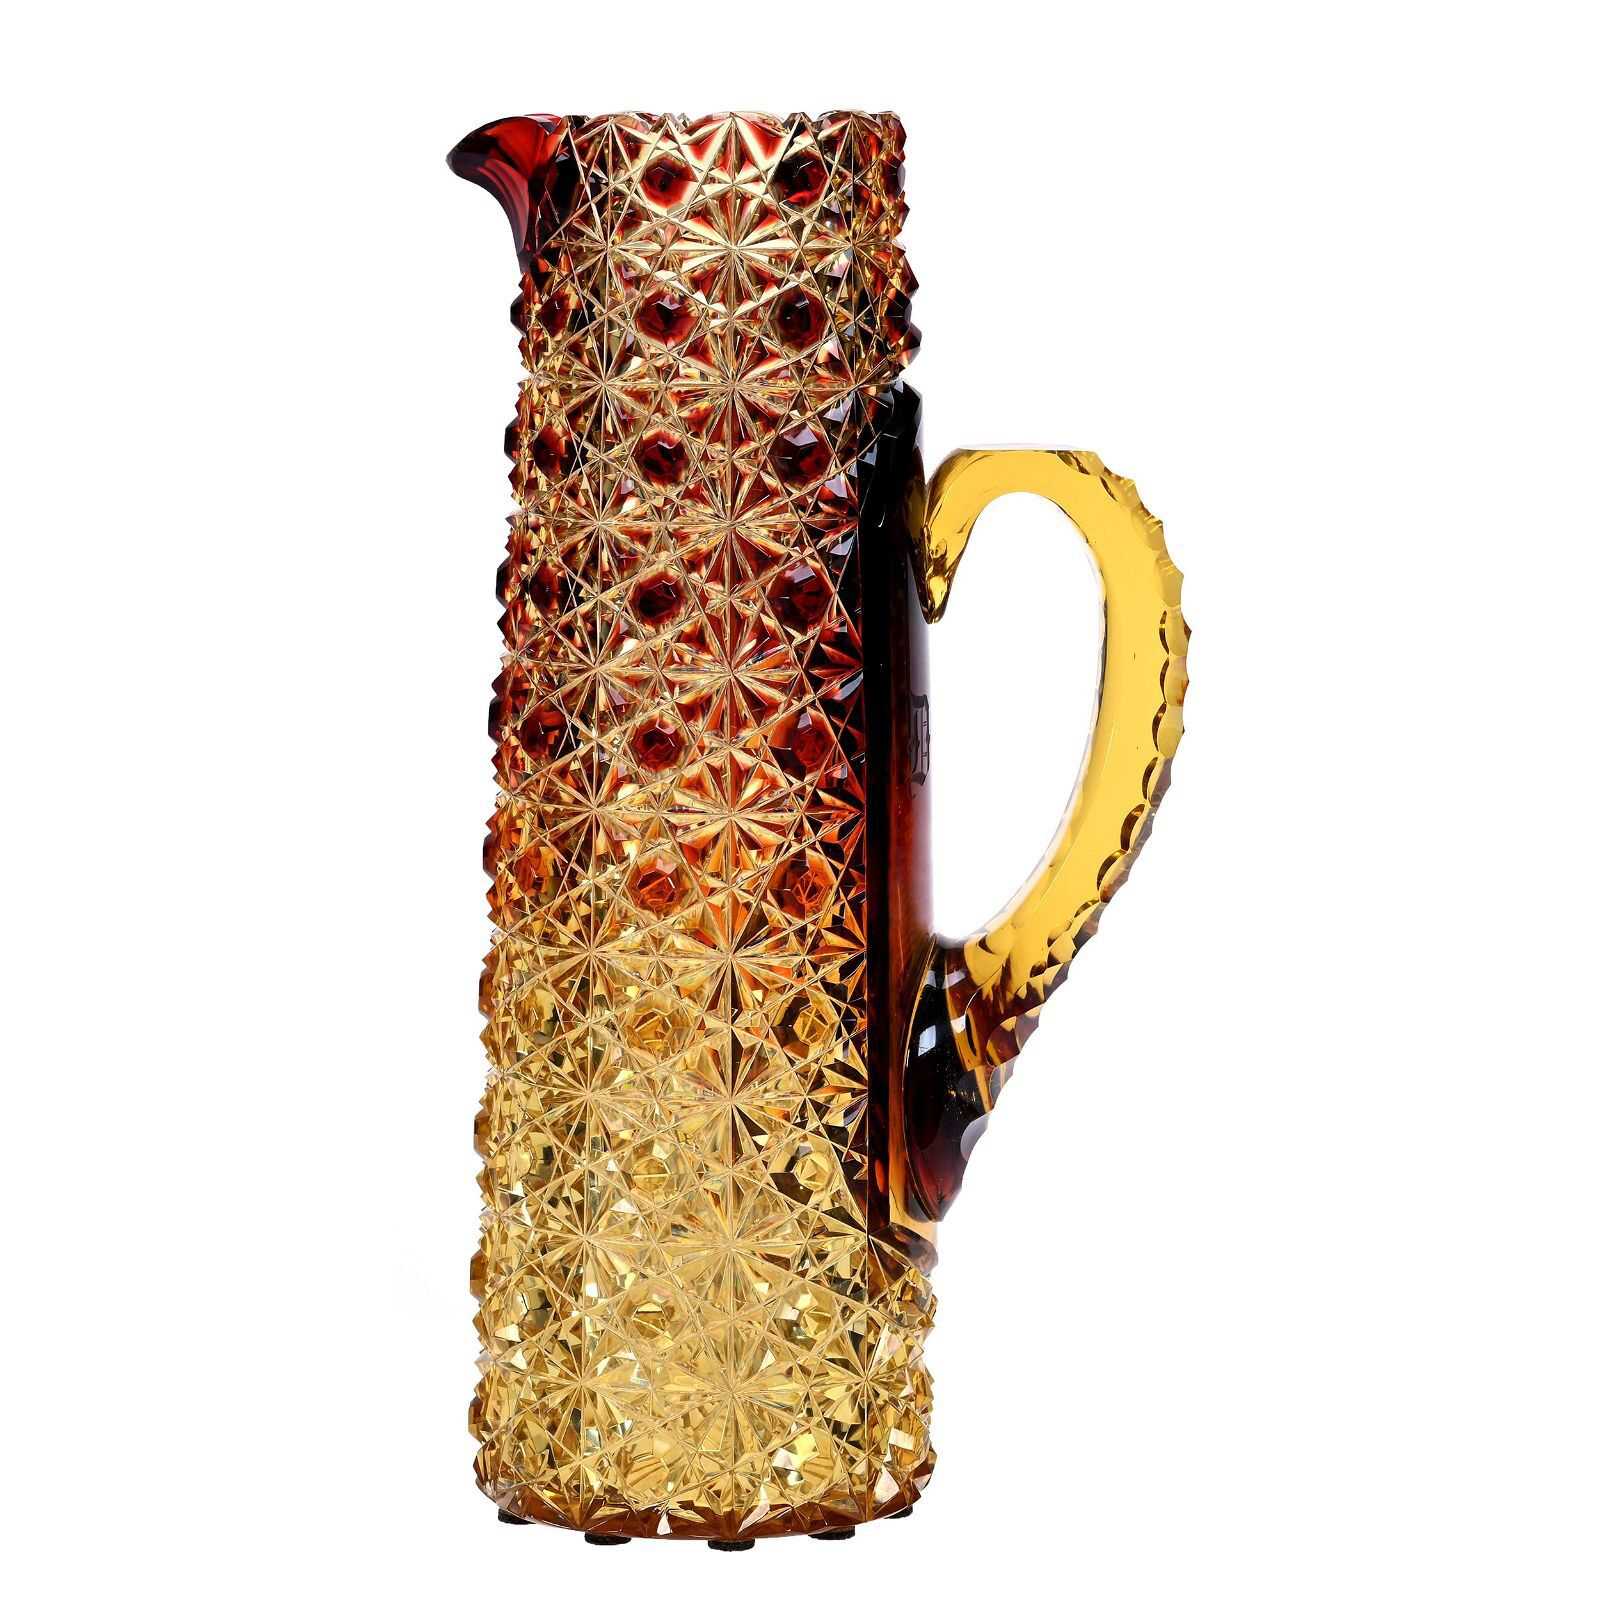 1883 Amberina Tankard by Libbey Cut Glass leads our five lots to watch